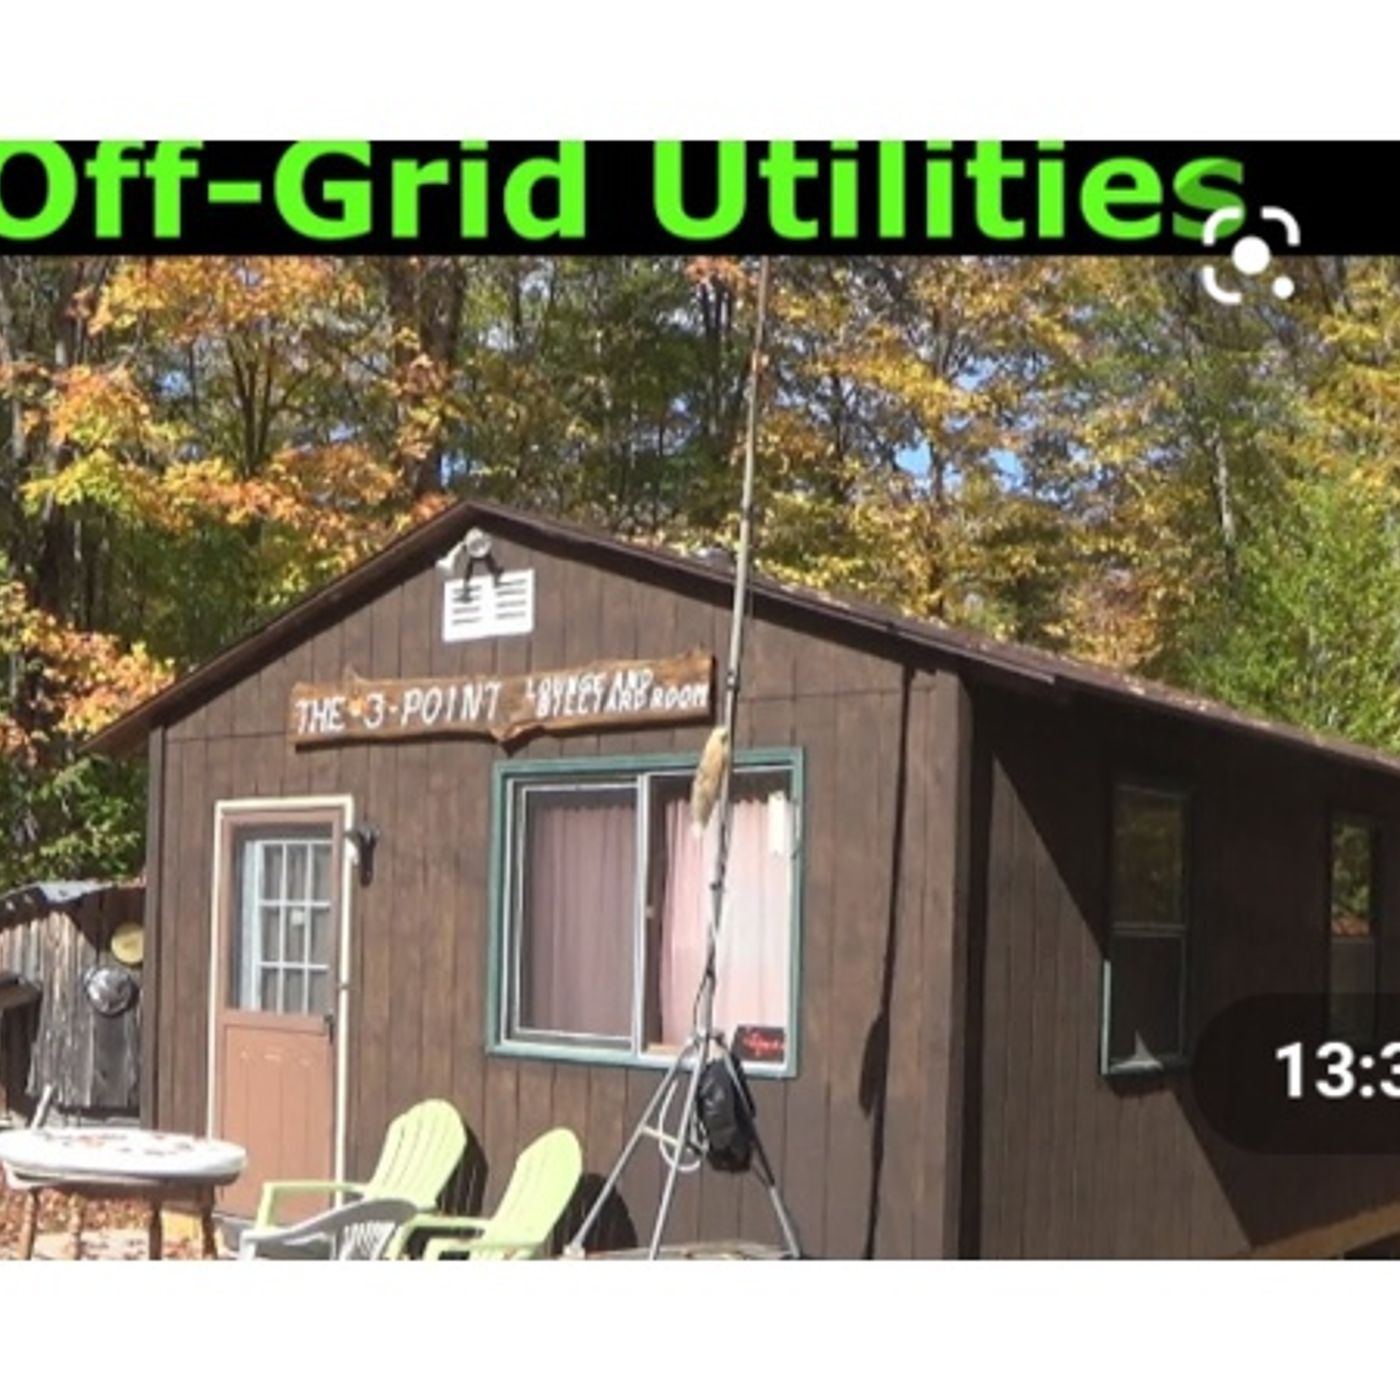 Off The Grid Utilities: 619-768-2945